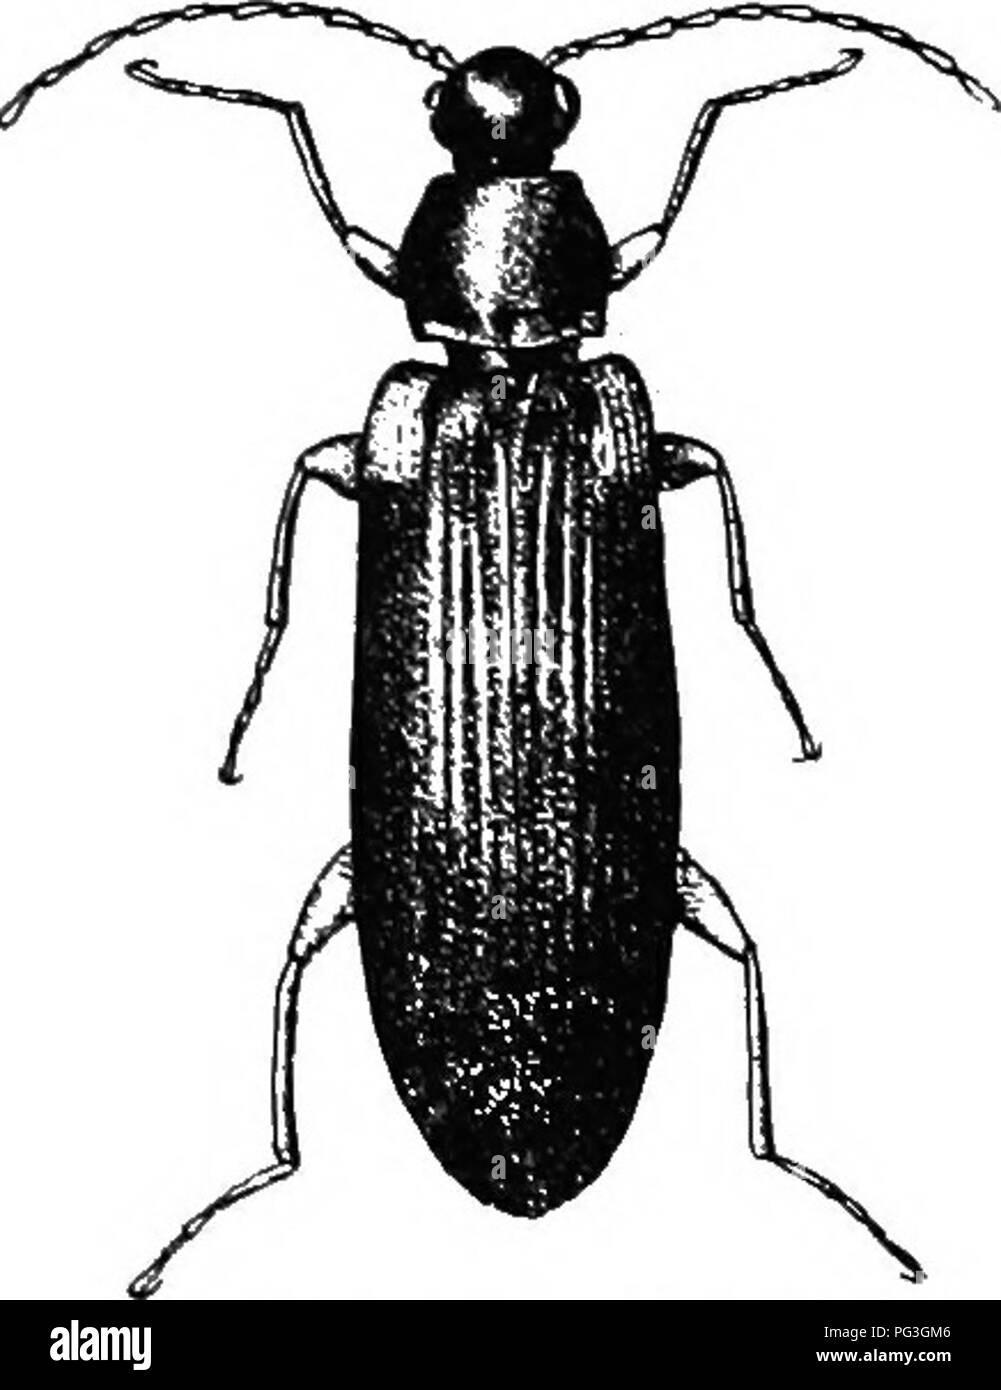 . An illustrated descriptive catalogue of the coleoptera or beetles (exclusive of the Rhynchophora) known to occur in Indiana : with bibliography and descriptions of new species . Beetles. THF. t'OMB-CIiAWEn BARK BEETLKS. 128]. Fig. uGS. X 7. (Original.) 2:M1 (TC.IT). MYrisrcH'n.UiKN fovivta Lee, X. Sp. X. Anier. nvk rerlilish-browu to piroims. sliiuiiii:; antenna' and le.t:s red- dish-yellow; elytra vith a small, pale reddish spot on humeri; piibesn'iue short, fine, sparse and semi-erert. Eyes small, separated by near- ly four times their width. Thorax one-third wider than long; sides stron Stock Photo